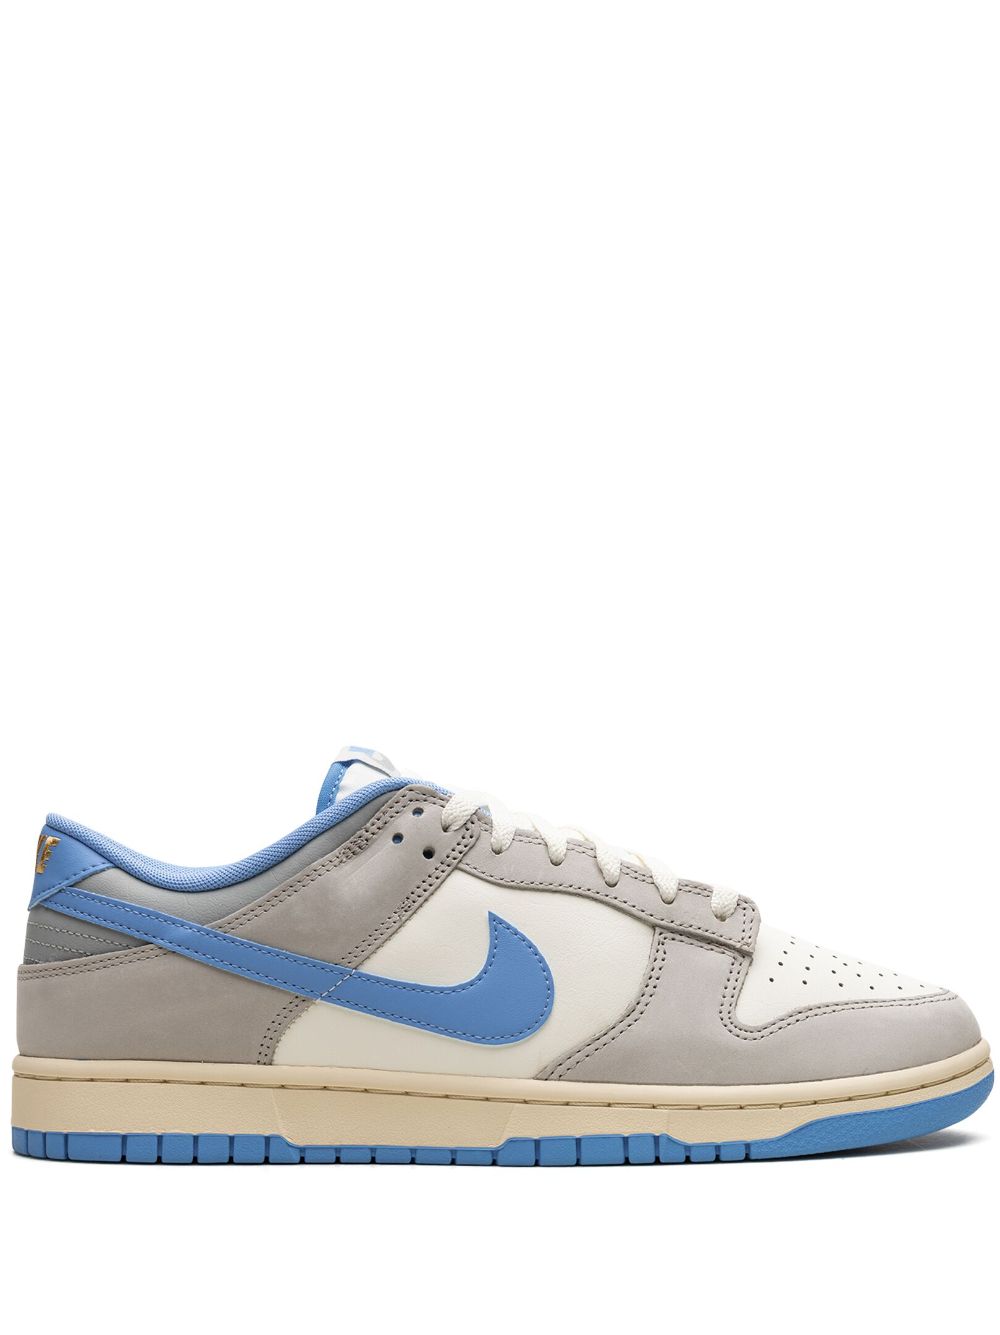 Nike Dunk Low "Athletic Department" sneakers - White